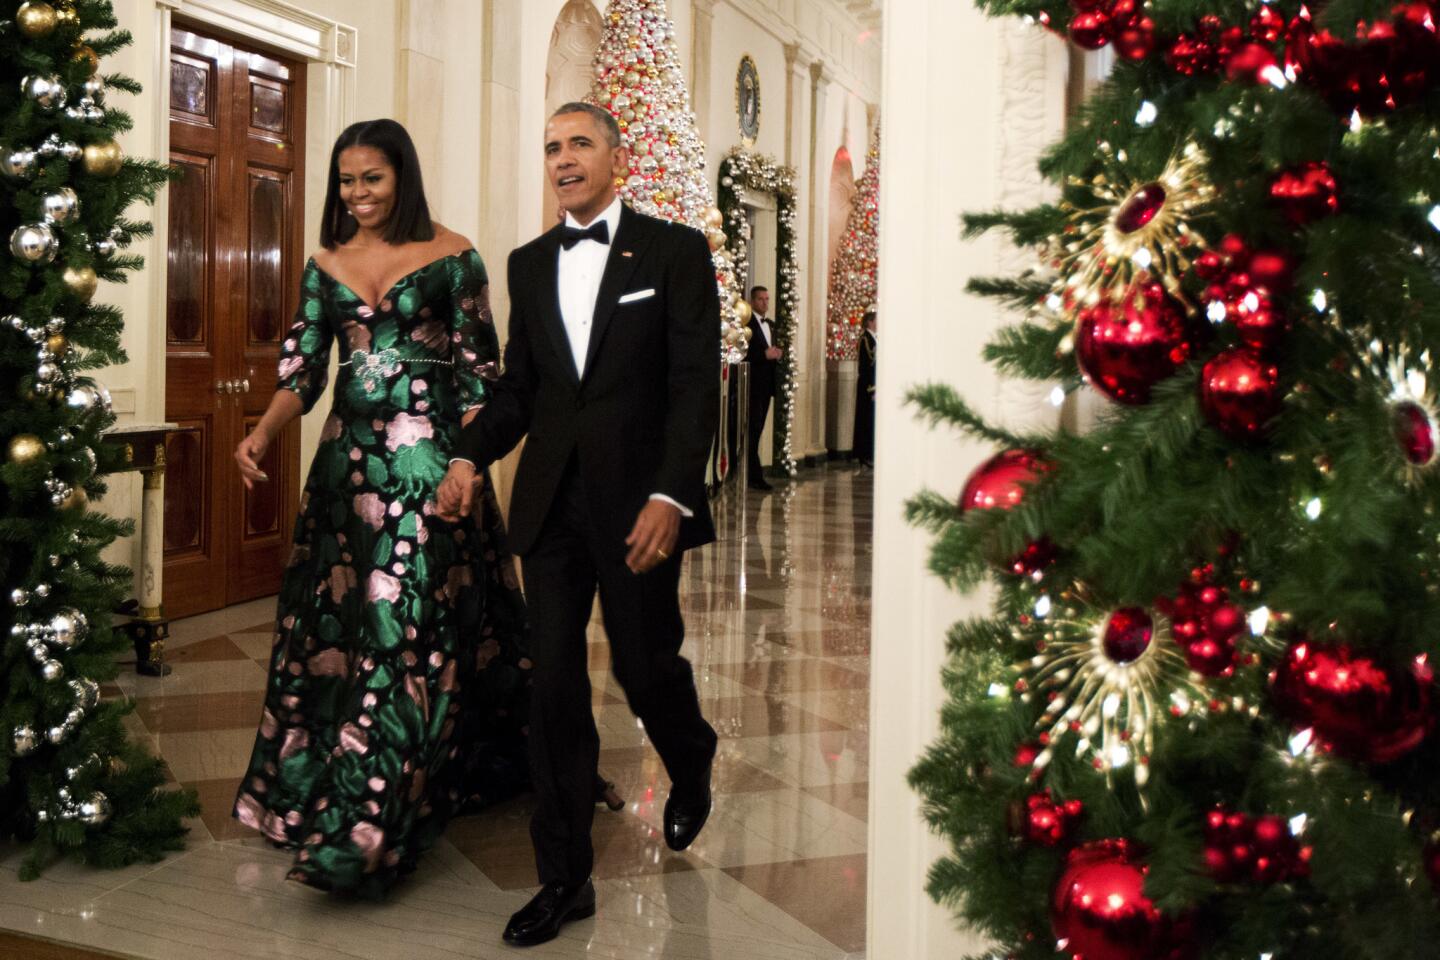 President Barack Obama and First Lady Michelle Obama arrive for a reception to honor recipients of the 2016 Kennedy Center Honors in the East Room of the White House in Washington, D.C.